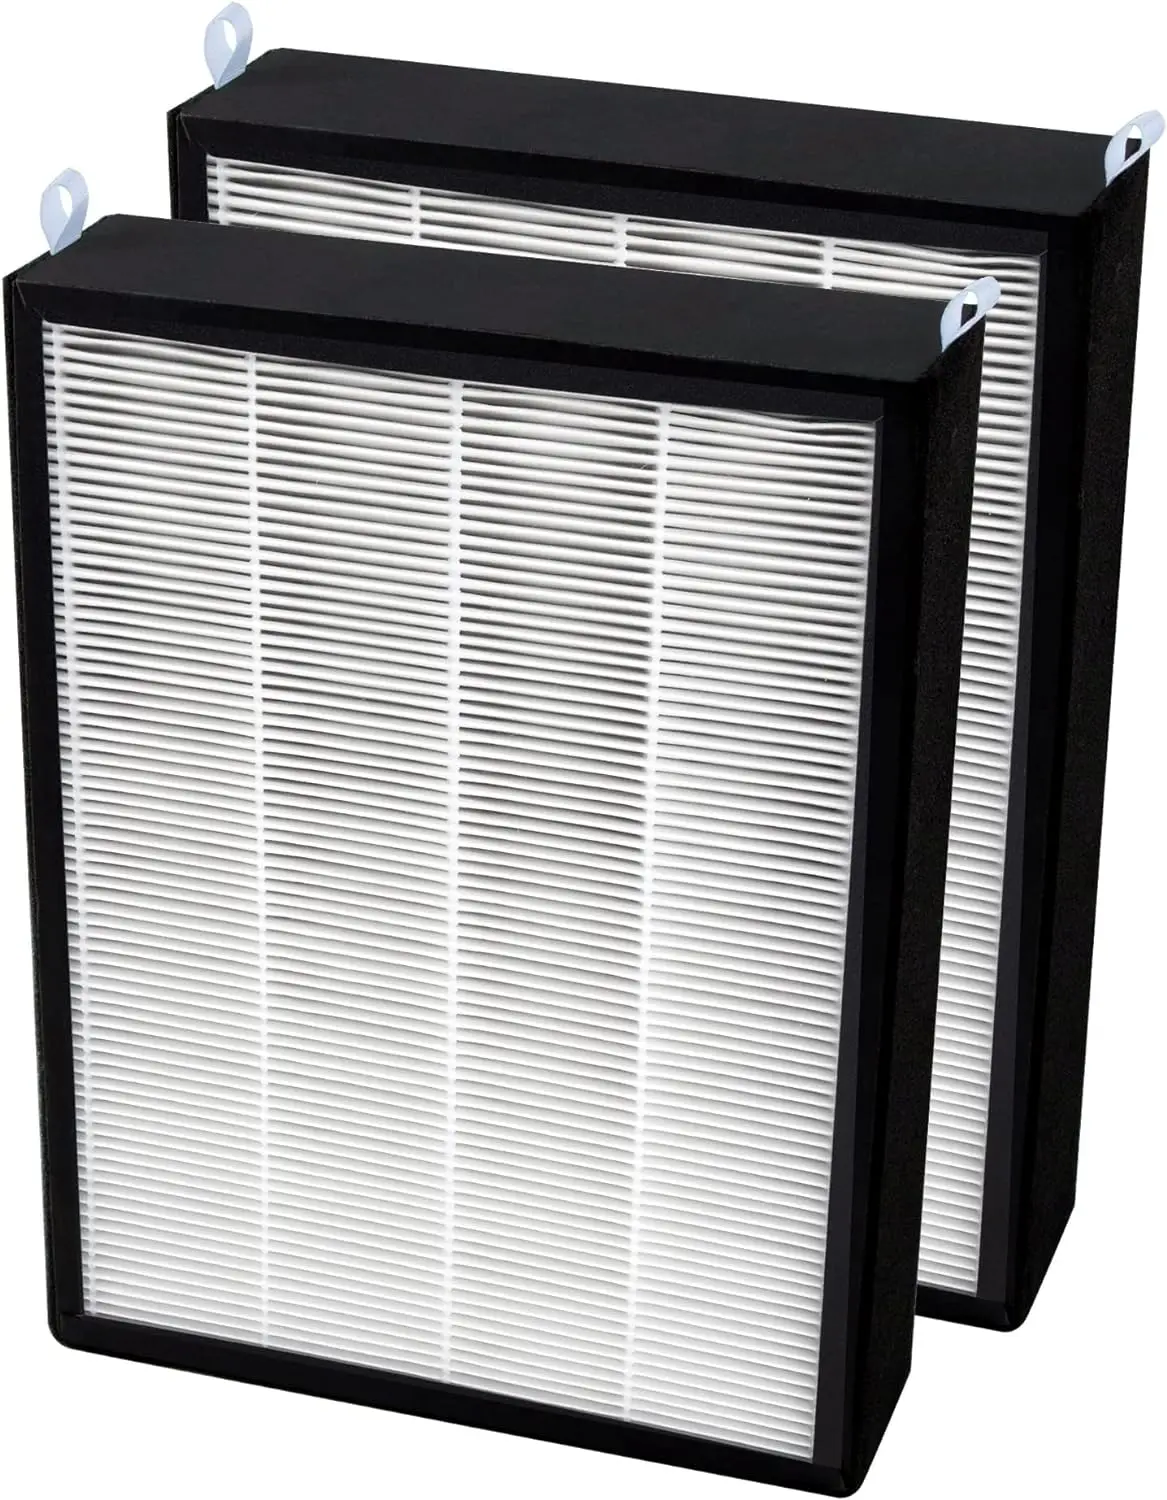 

Air Purifier \u2013 2-Pack Genuine Replacement HEPA/Carbon Combo Filter, Removes Allergens, Pollutants, & Odors, Sold by Ori